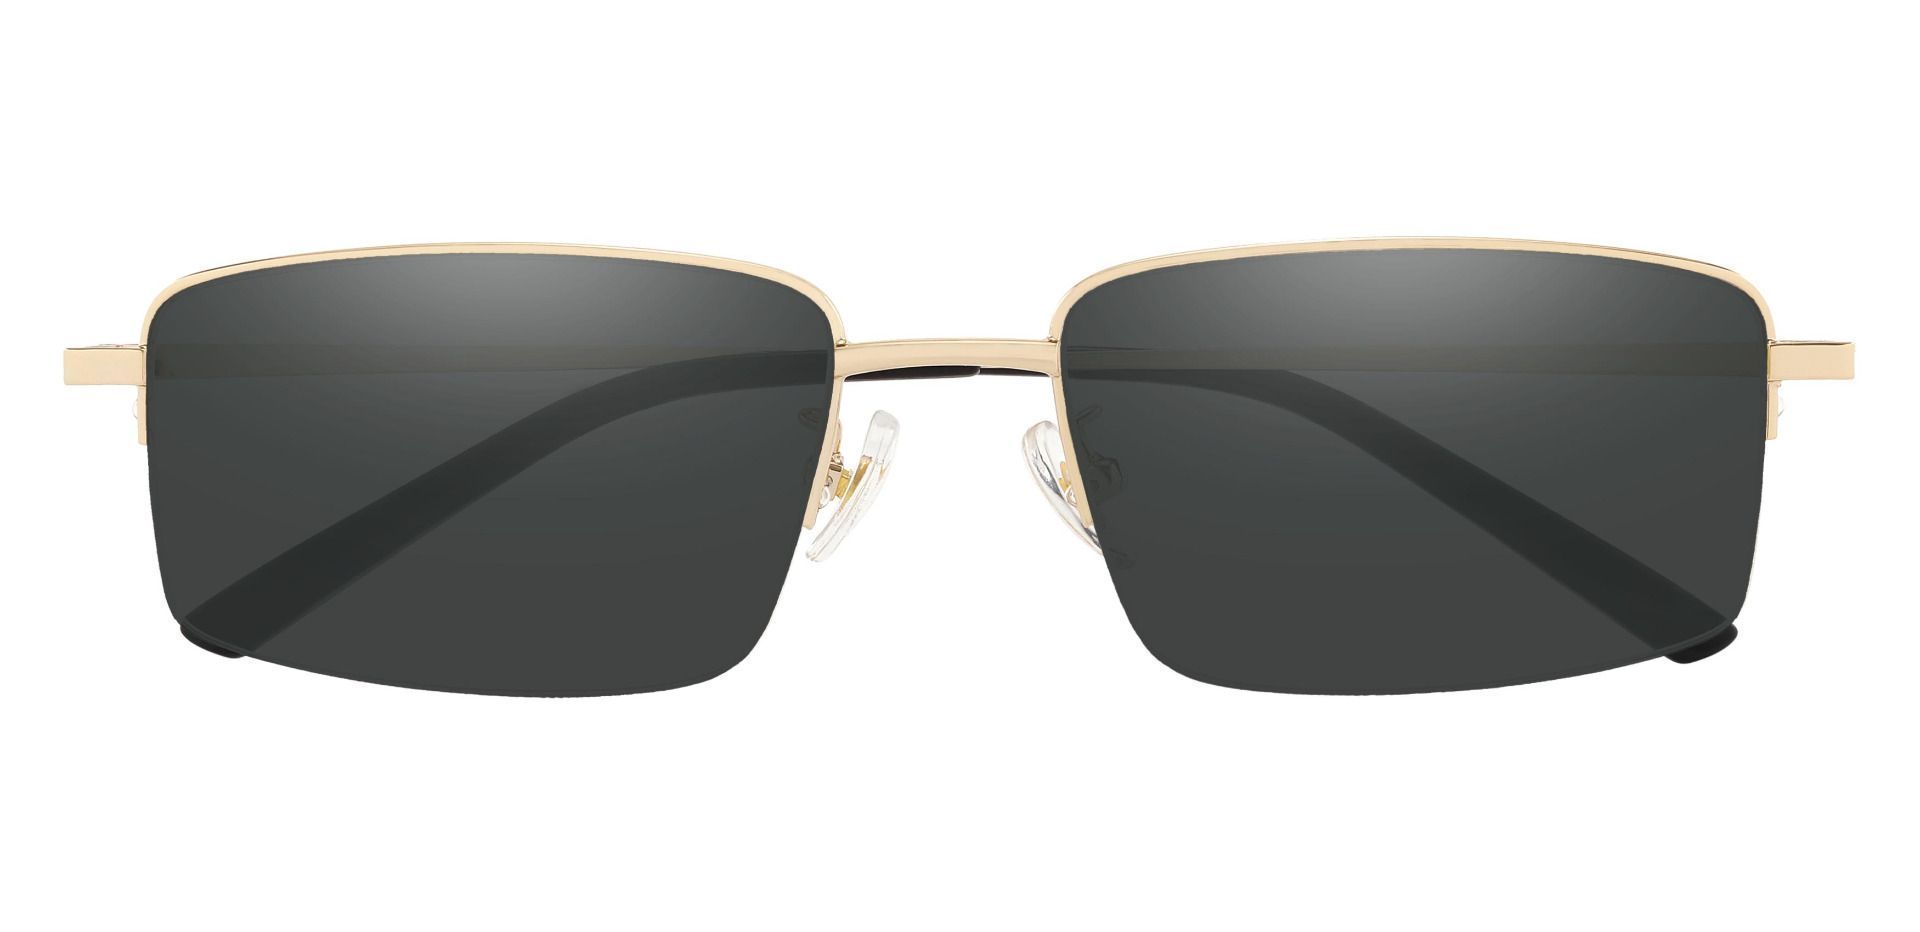 Wayne Rectangle Non-Rx Sunglasses - Gold Frame With Gray Lenses